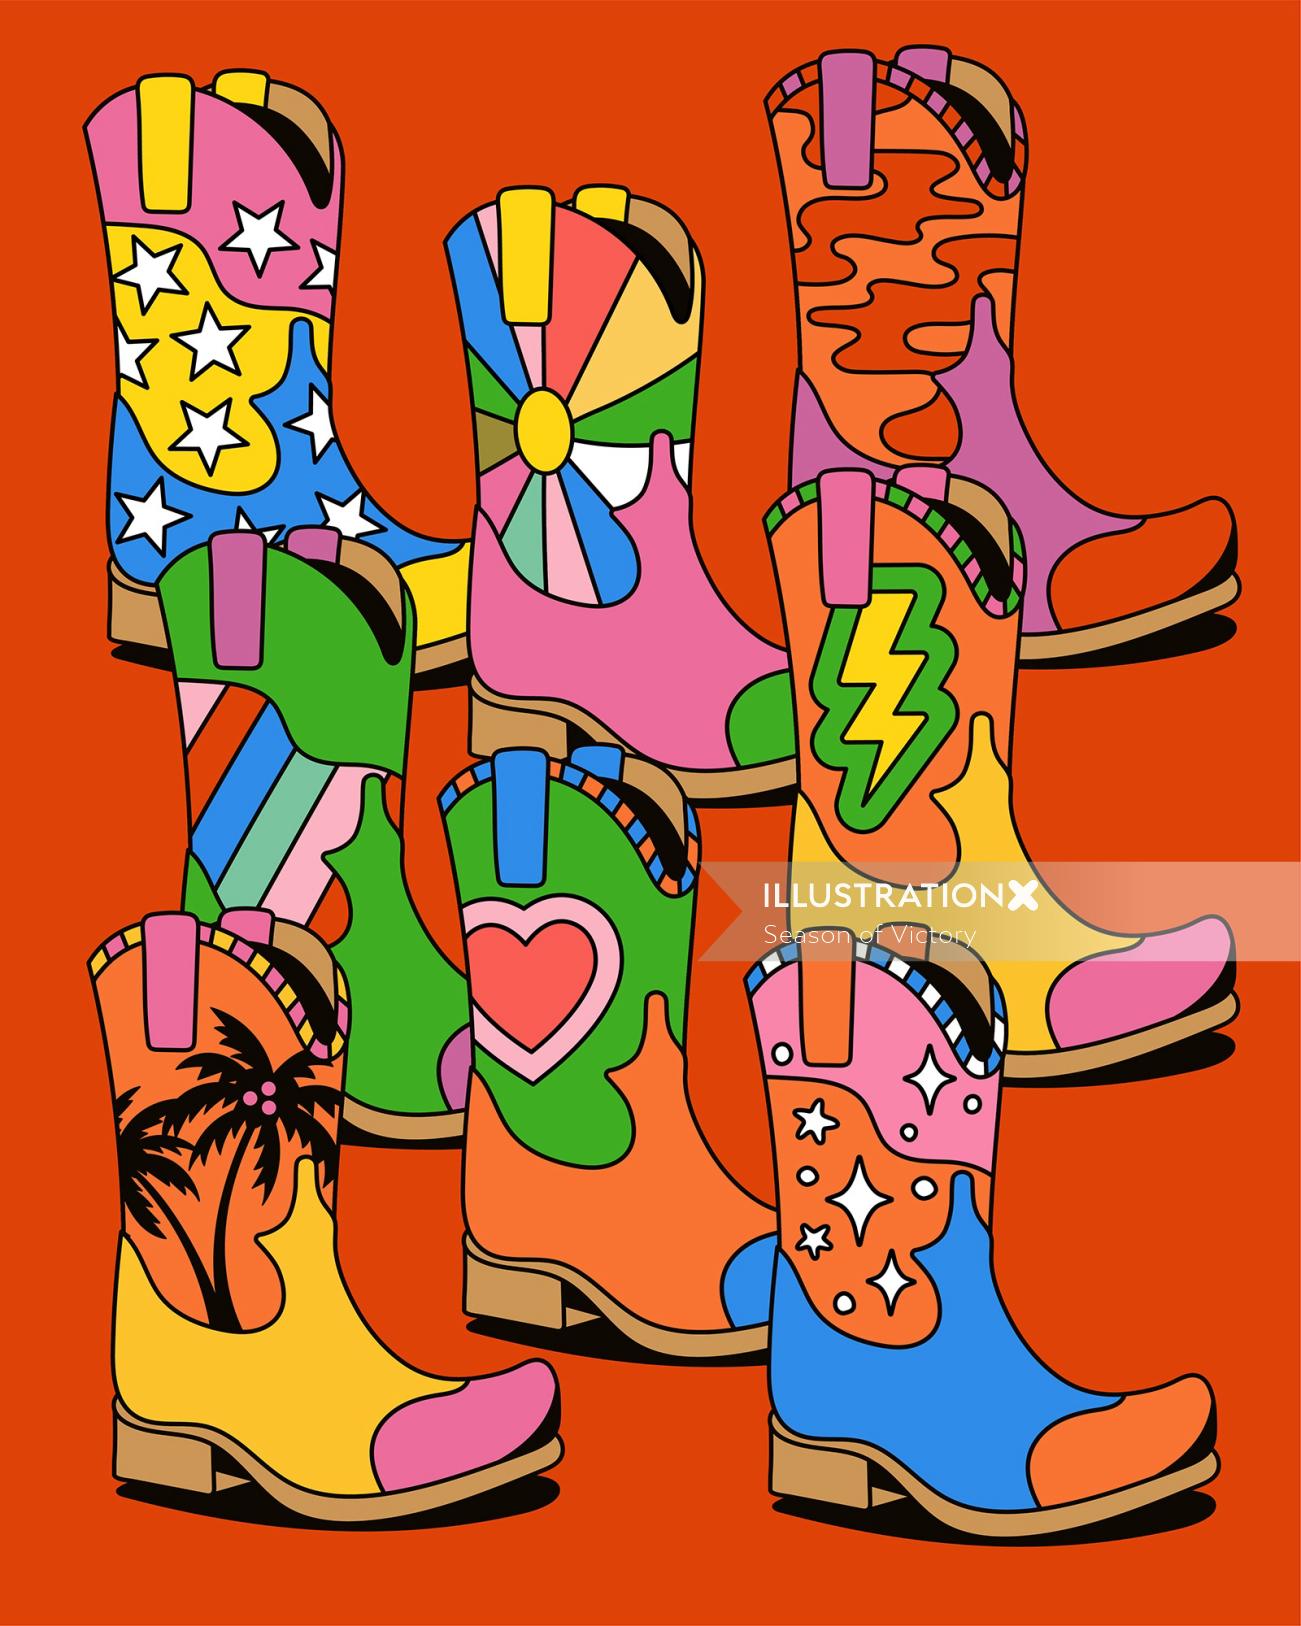 fashion, cowboy boots, boots, colorful, shoes, clothing, america, cowboy, country, western, texas, s